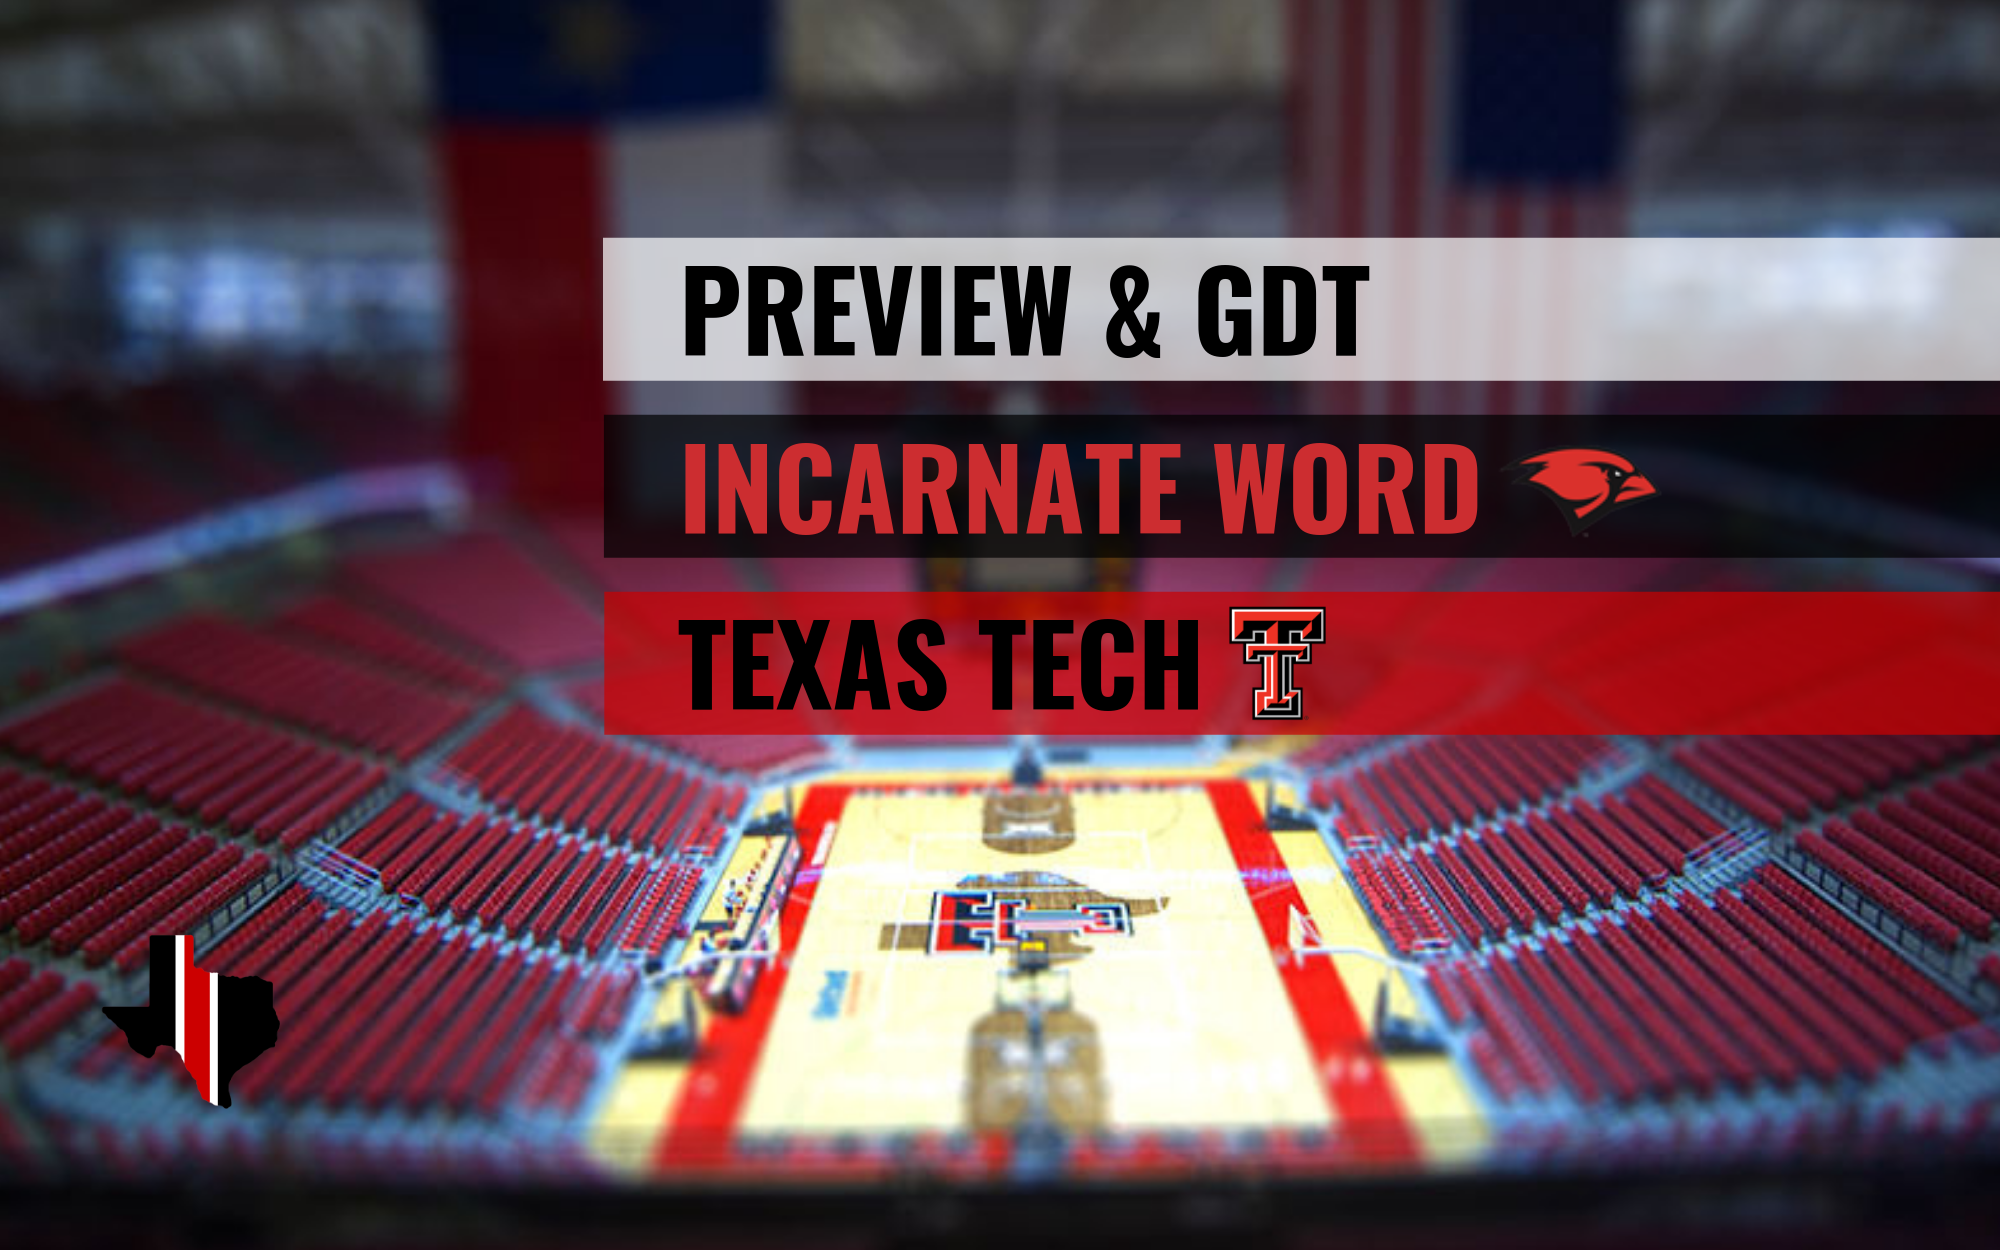 Preview & GDT: Incarnate Word vs. Texas Tech